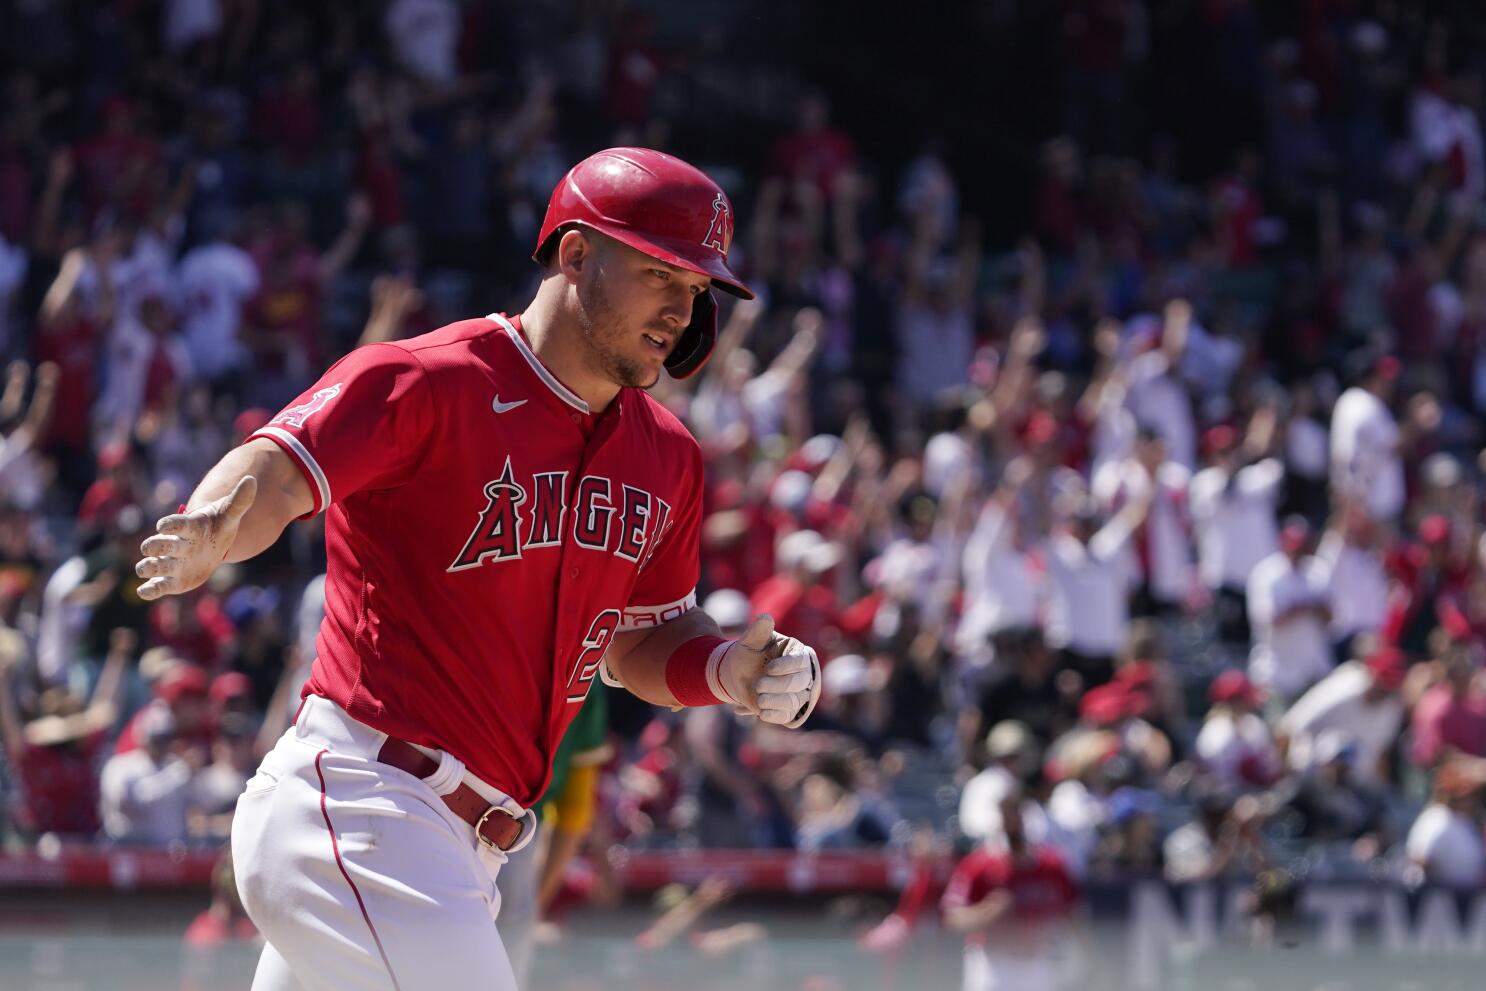 Derek Jeter, Mike Trout earn applause in MLB All-Star Game